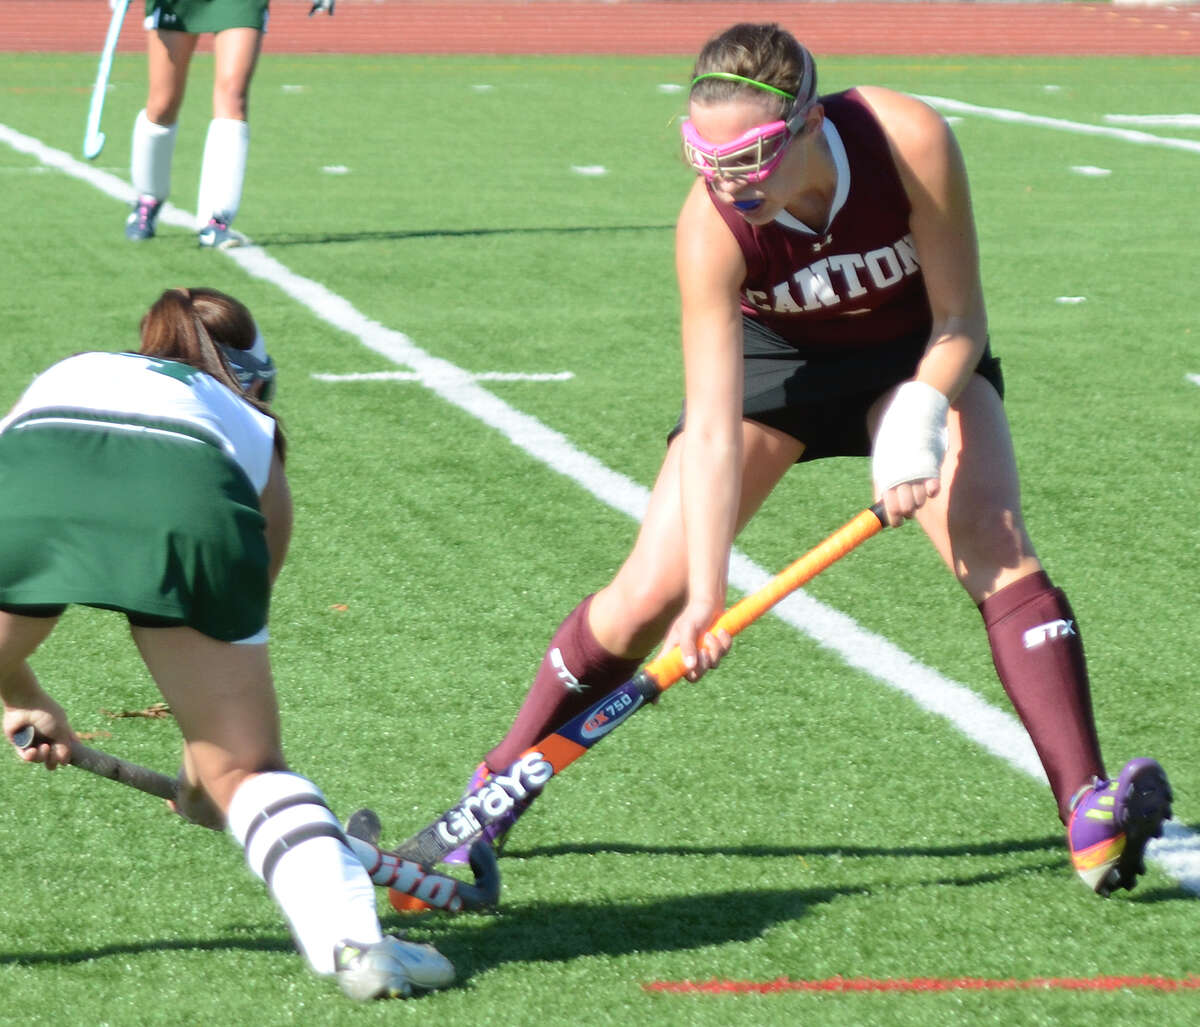 Canton’s Emily Chouinard (9) battles Enfield’s Jenna Clauette in Monday’s game in Enfield.